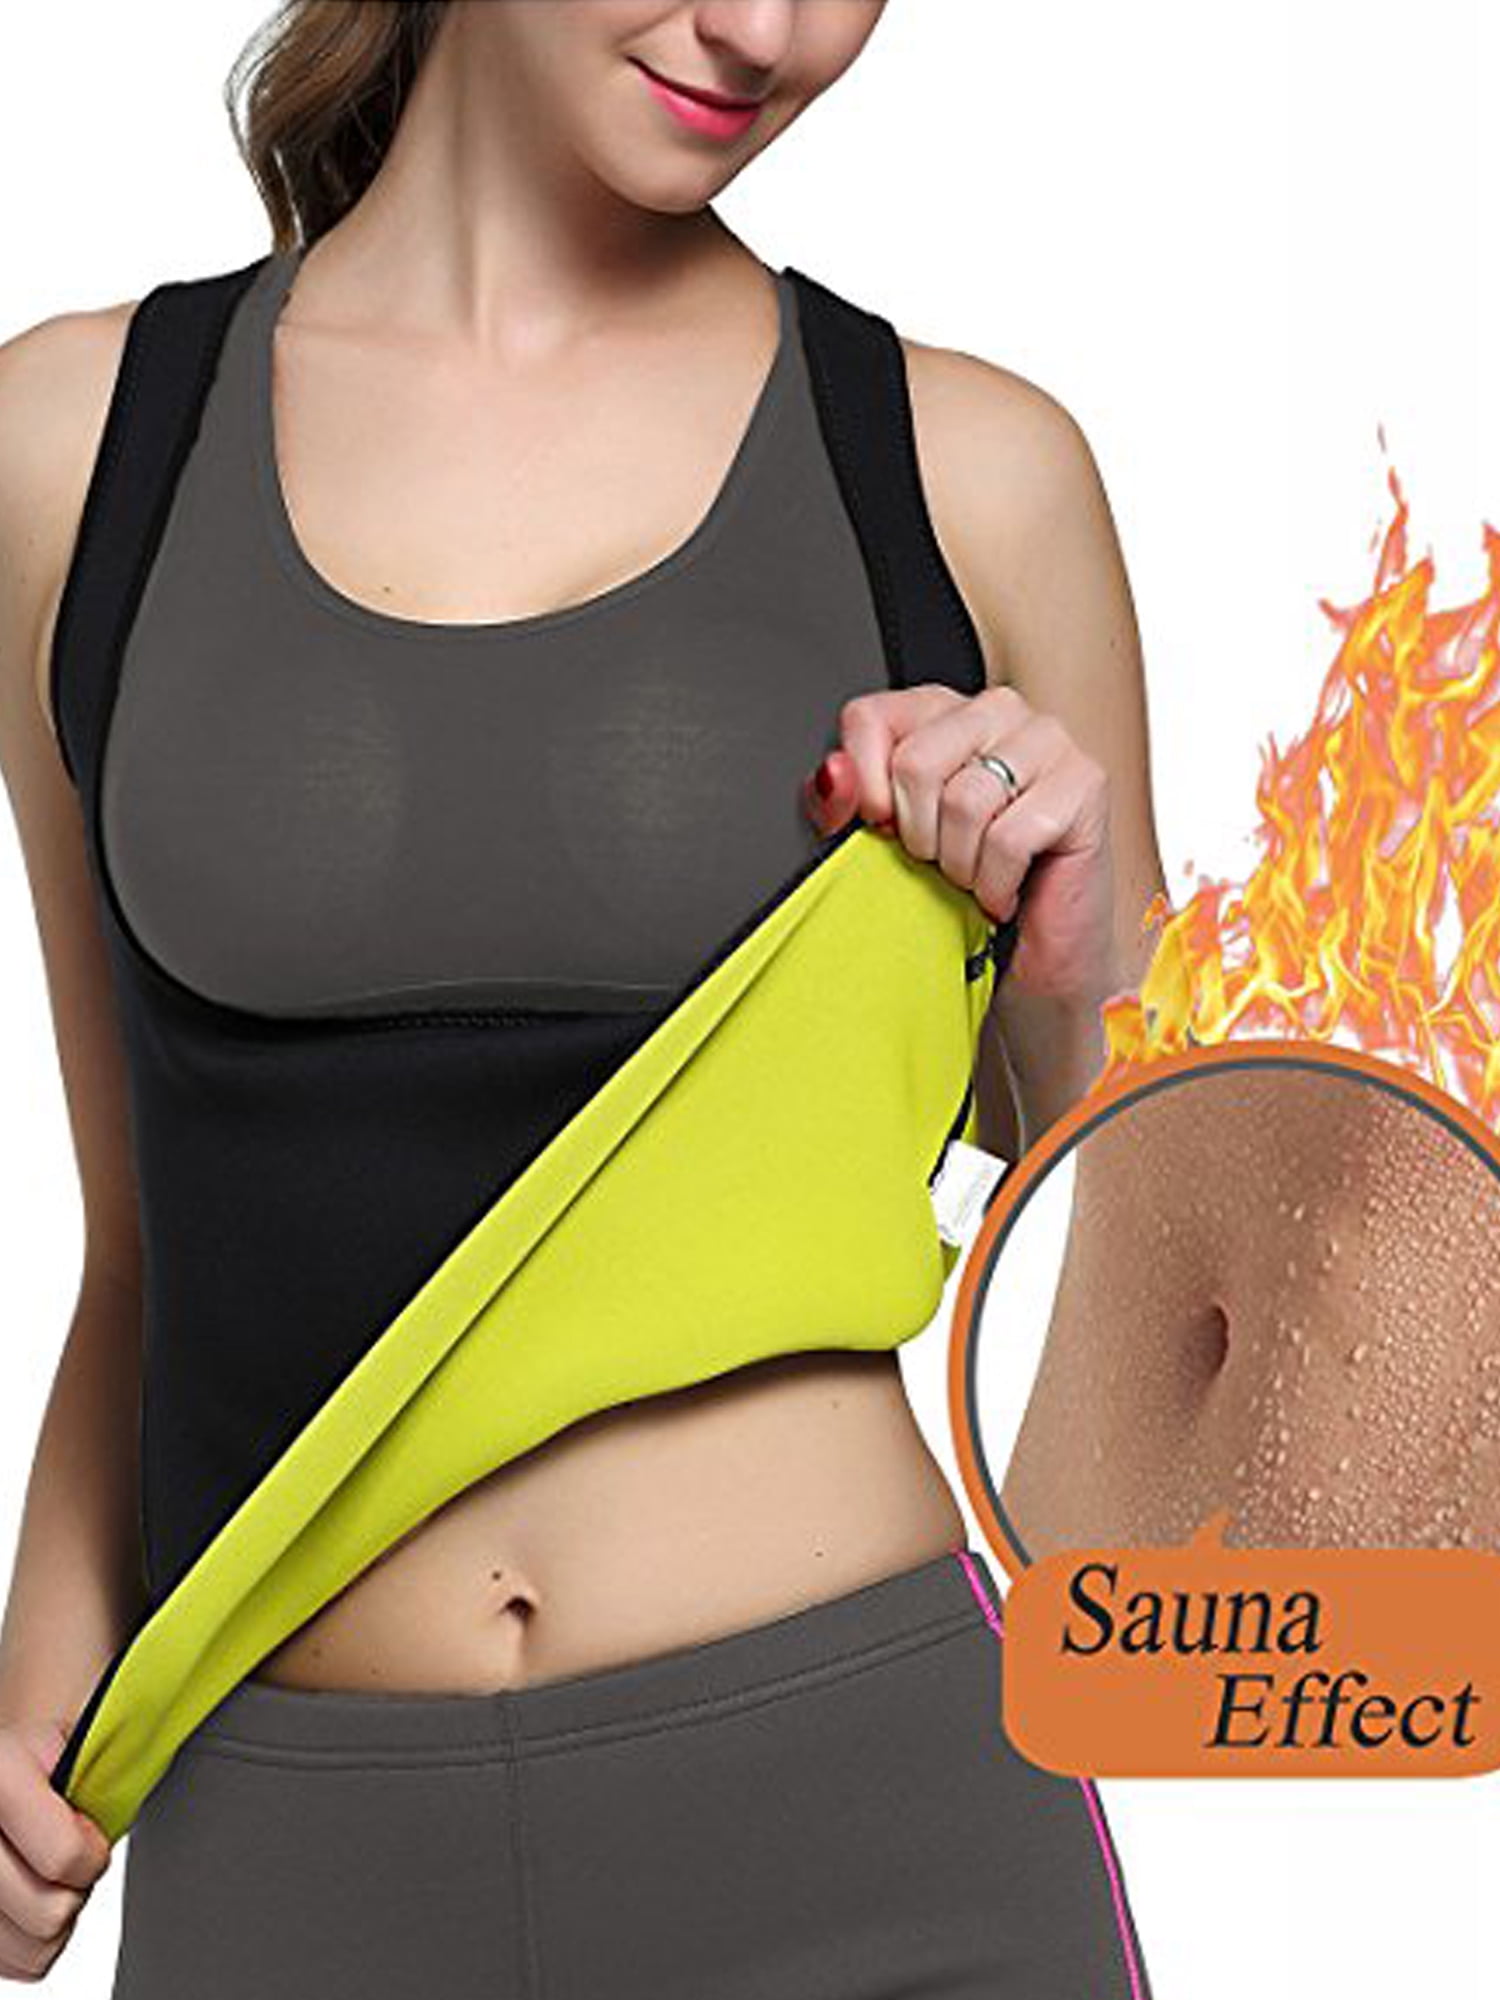 Thermo Sweat Body Shaper Slimming Waist Trainer Cincher Yoga Gym Top Vest Hot UK